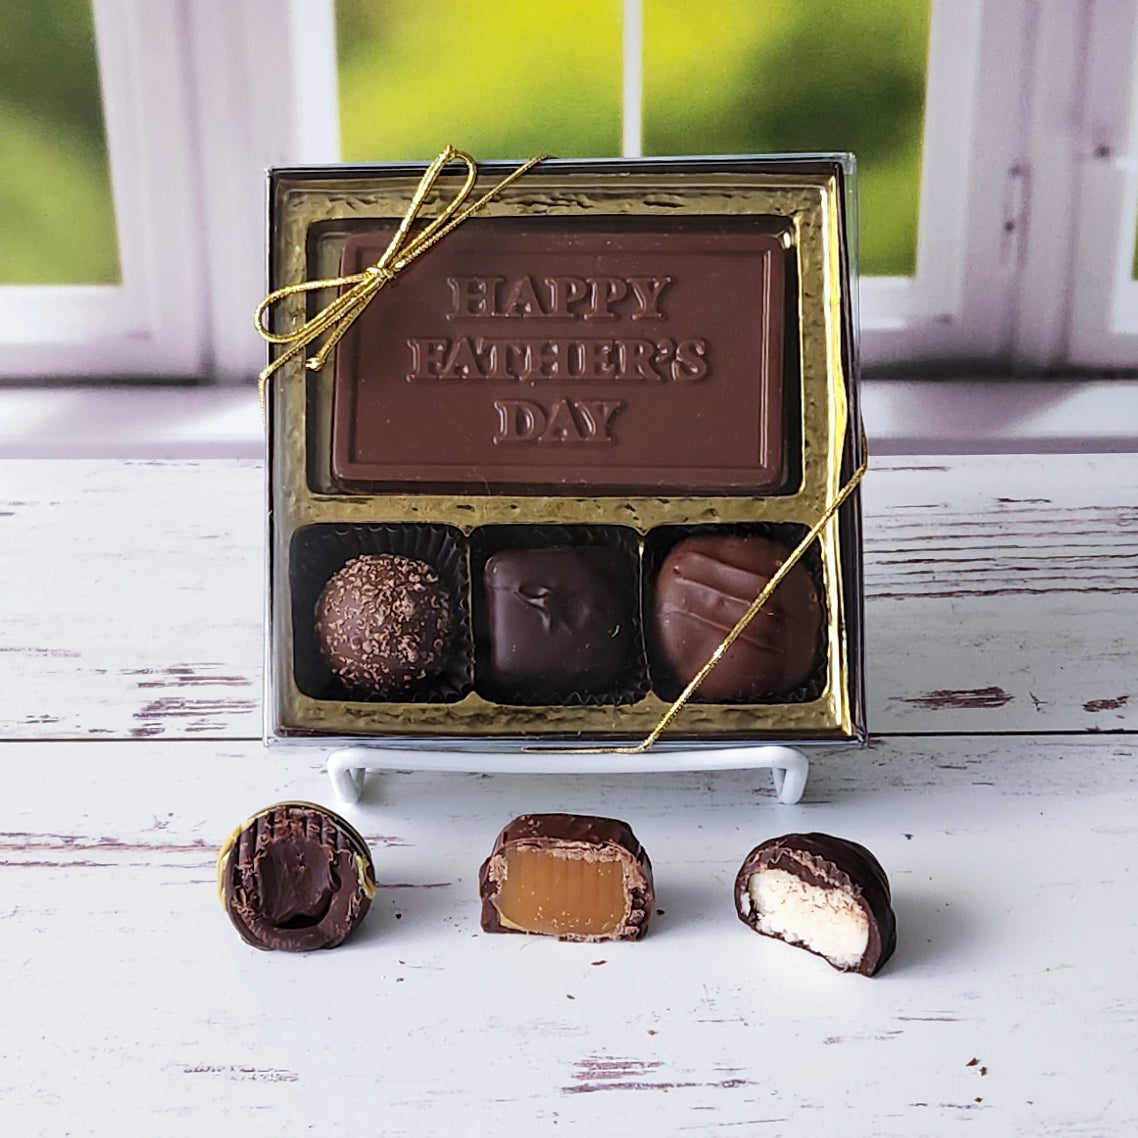 Give Dad a sweet treat. This chocolate box is just thing to help him celebrate Father's Day.